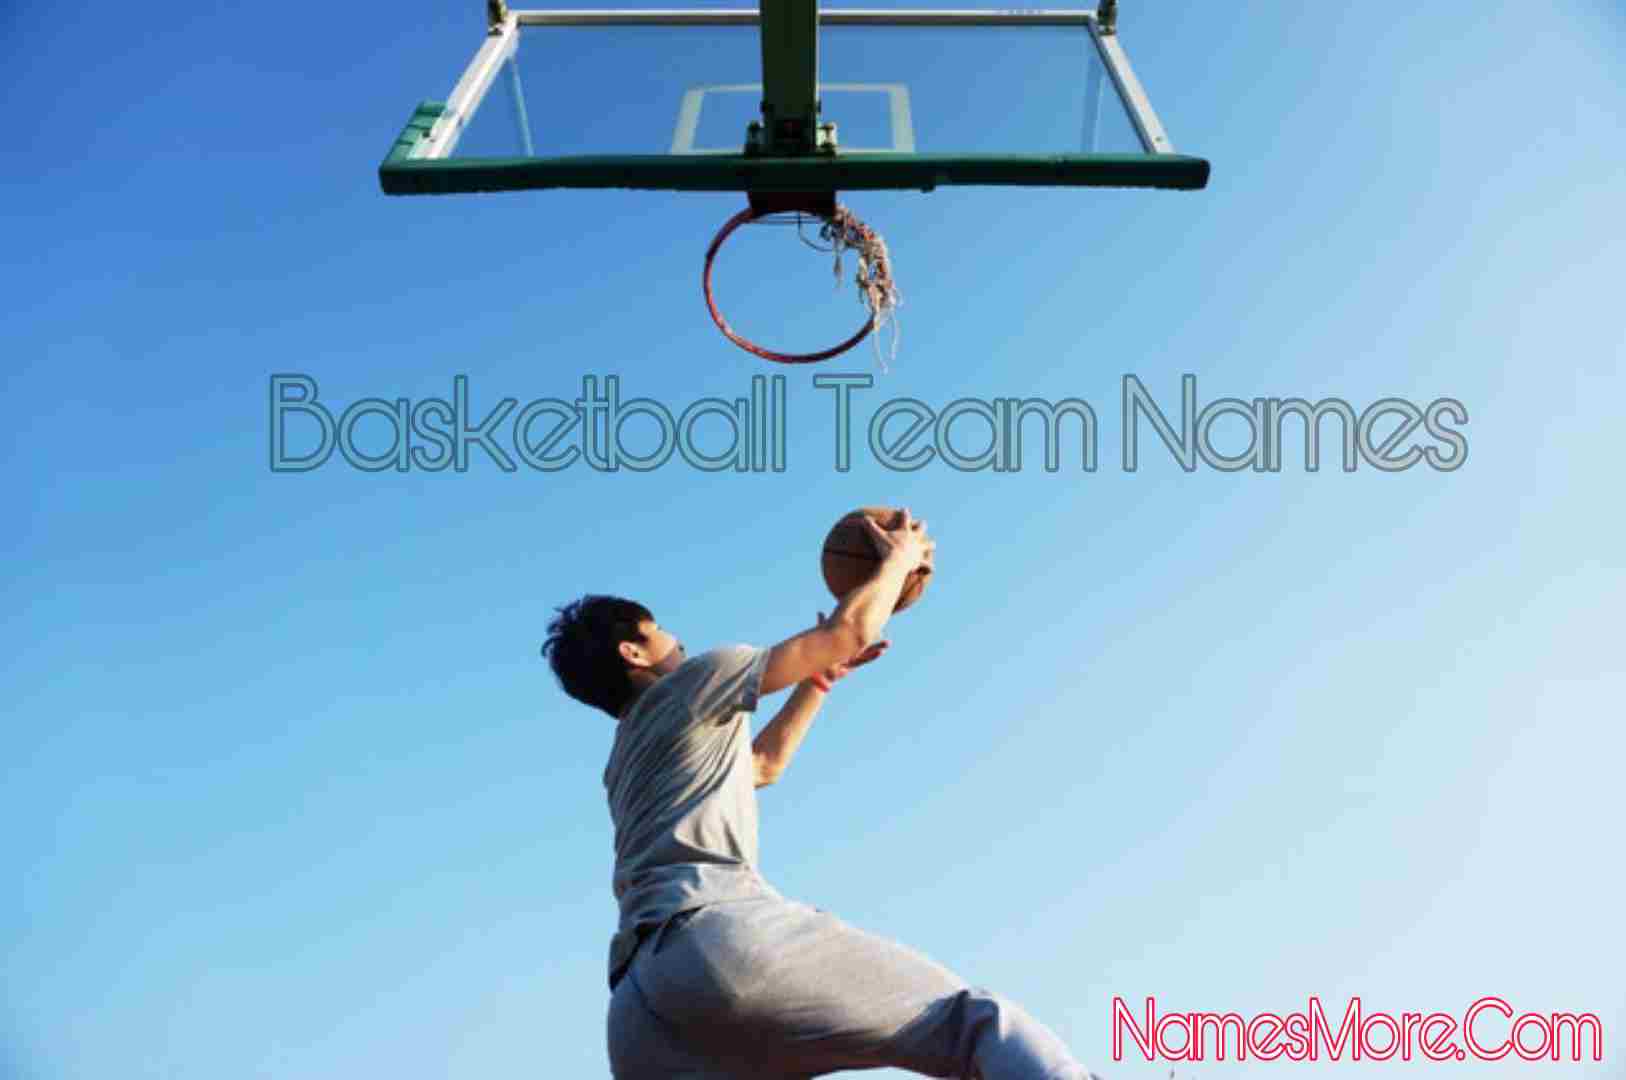 801 Creative & Catchy Basketball Team Name Ideas You Can Use in 2023